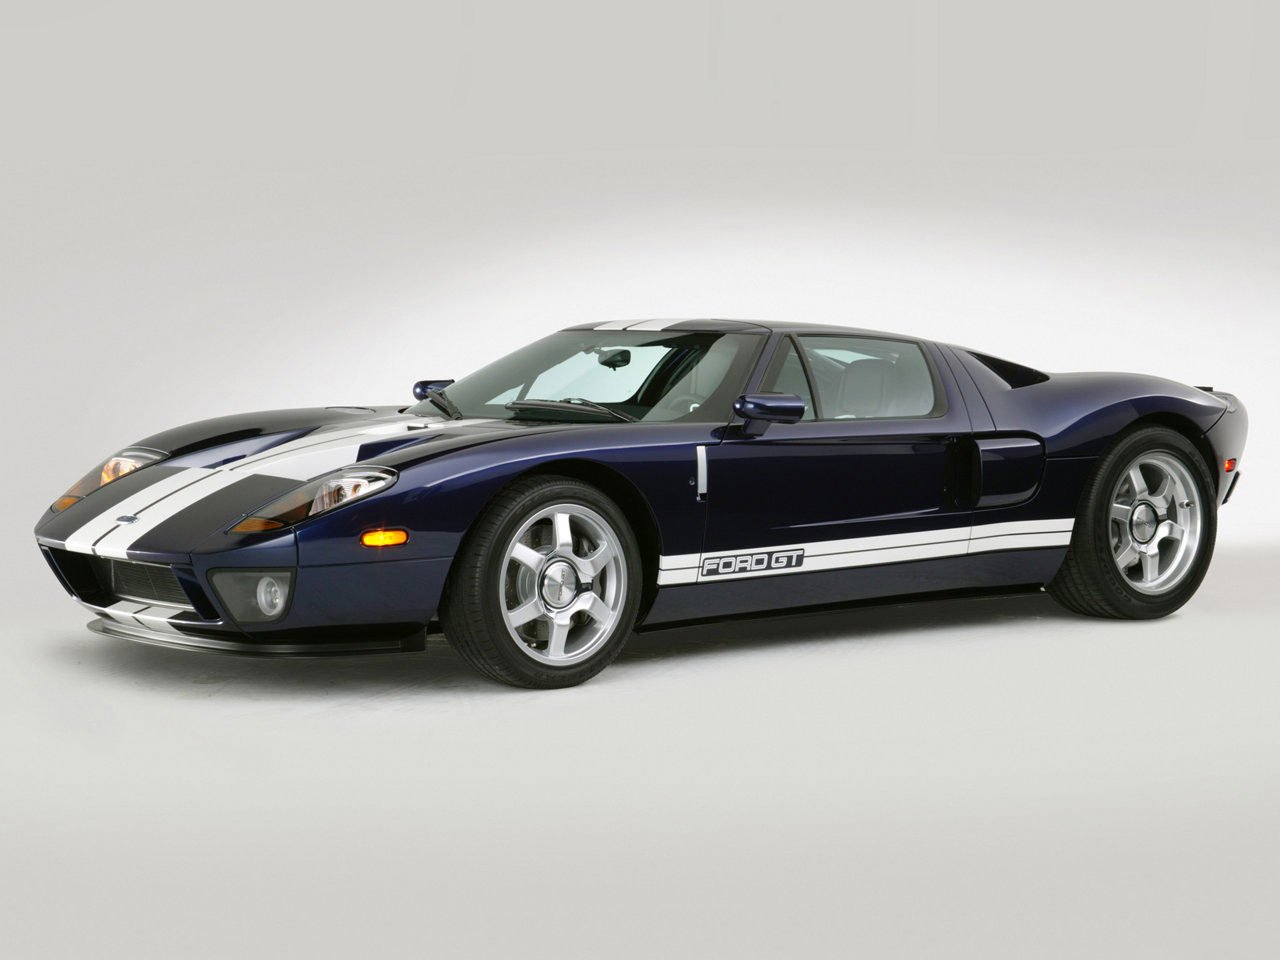 Gallery FORD Ford GT 2005 Ford GT wallpaper 1280x960